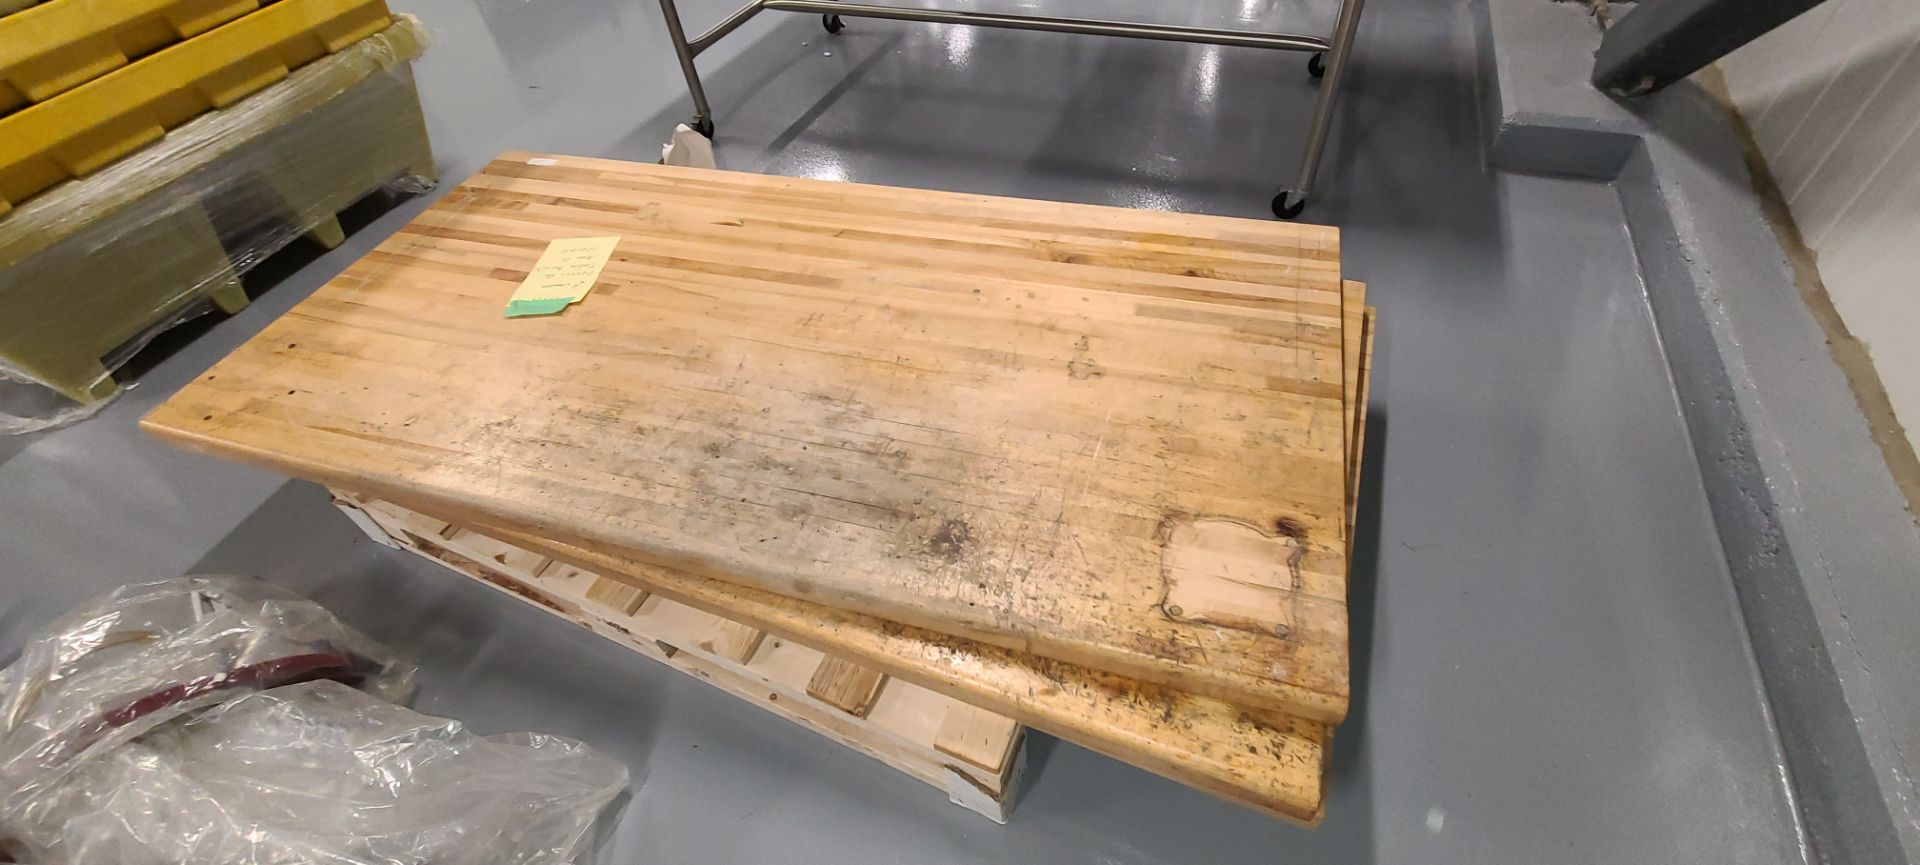 3-Butcher Block Style Wood Table Tops - Image 3 of 3